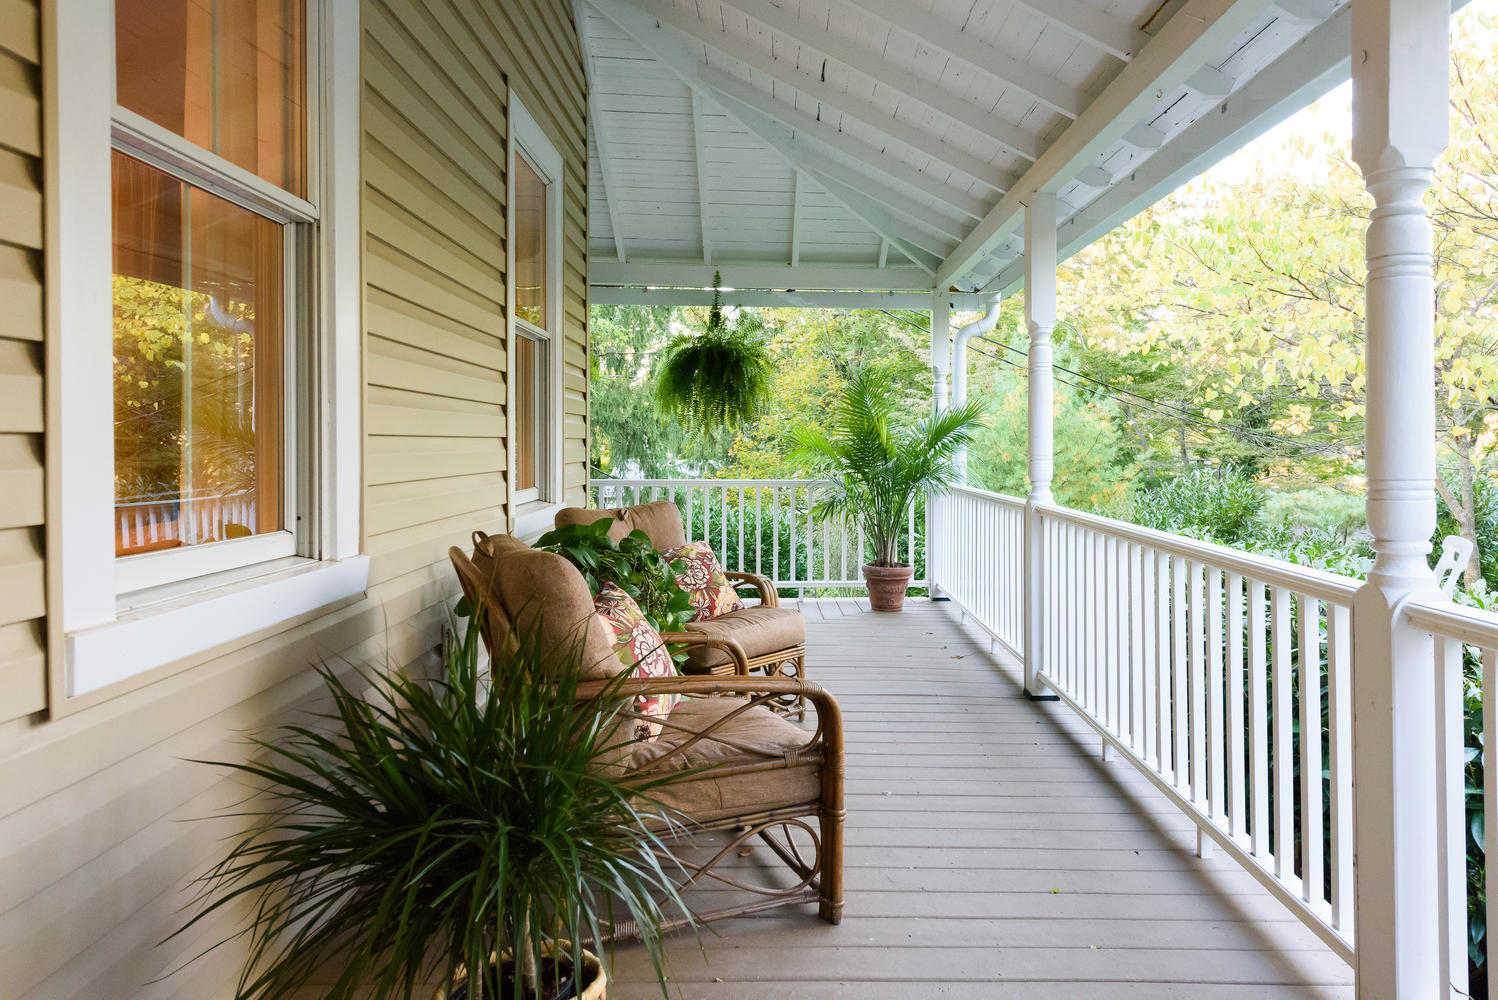 Stage Your Front Porch for the Summer, Add Curb Appeal!